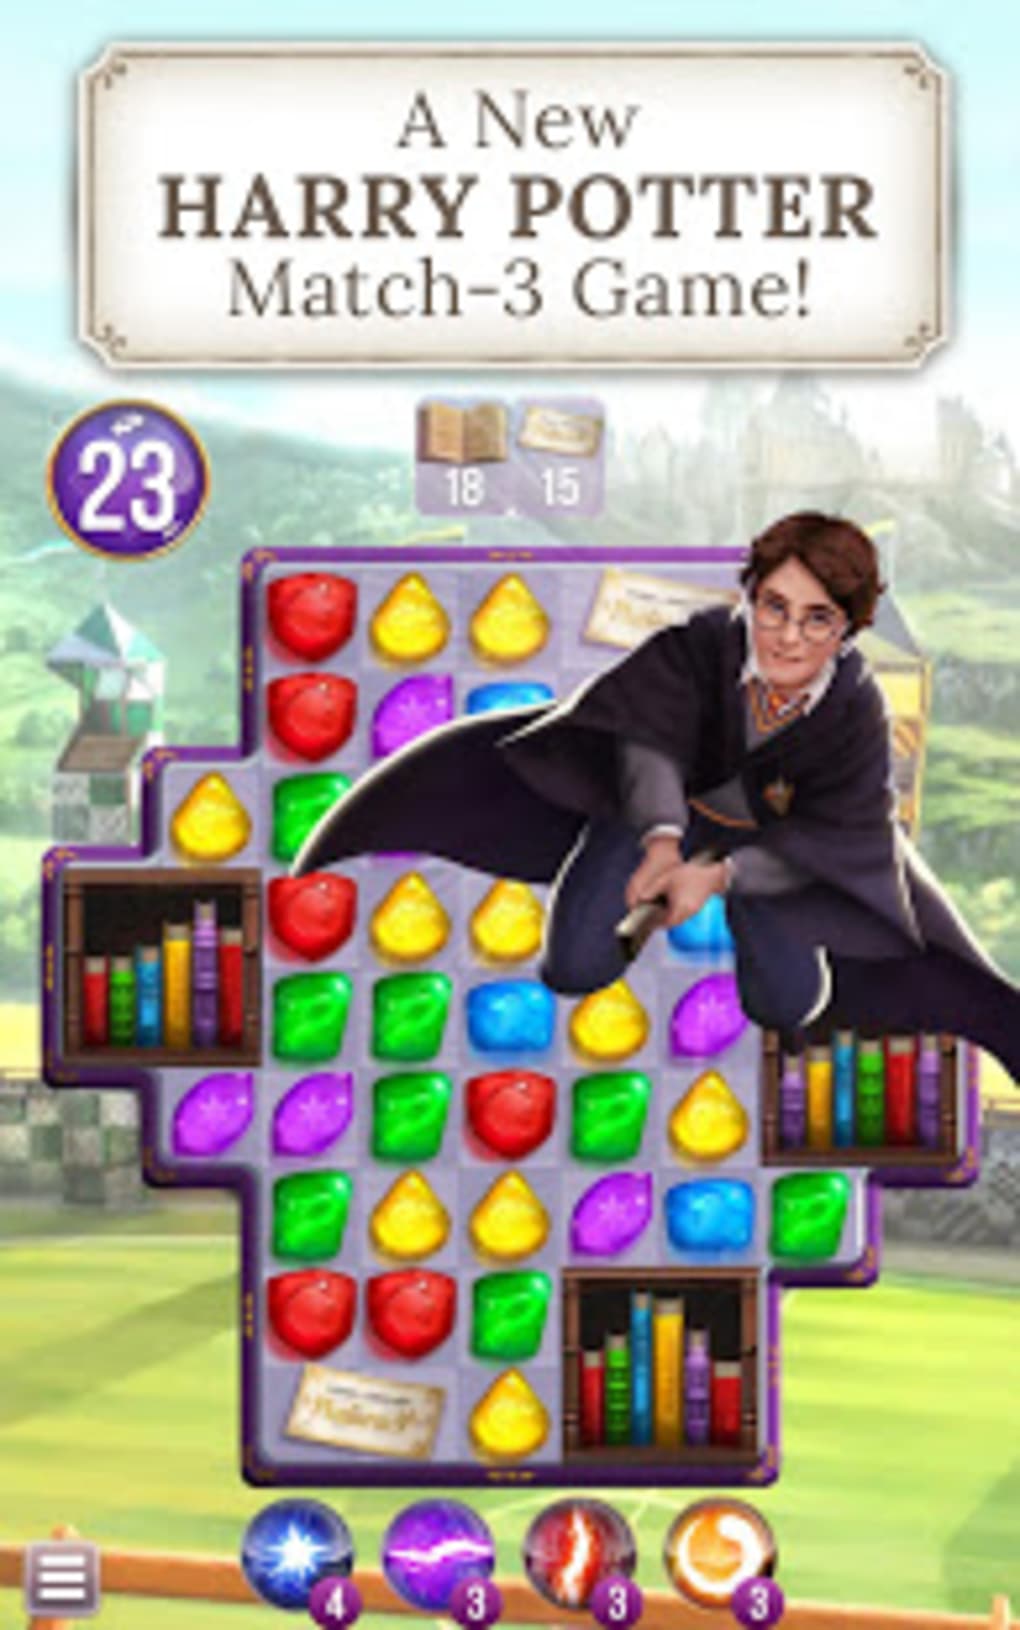 harry potter puzzles and spells update